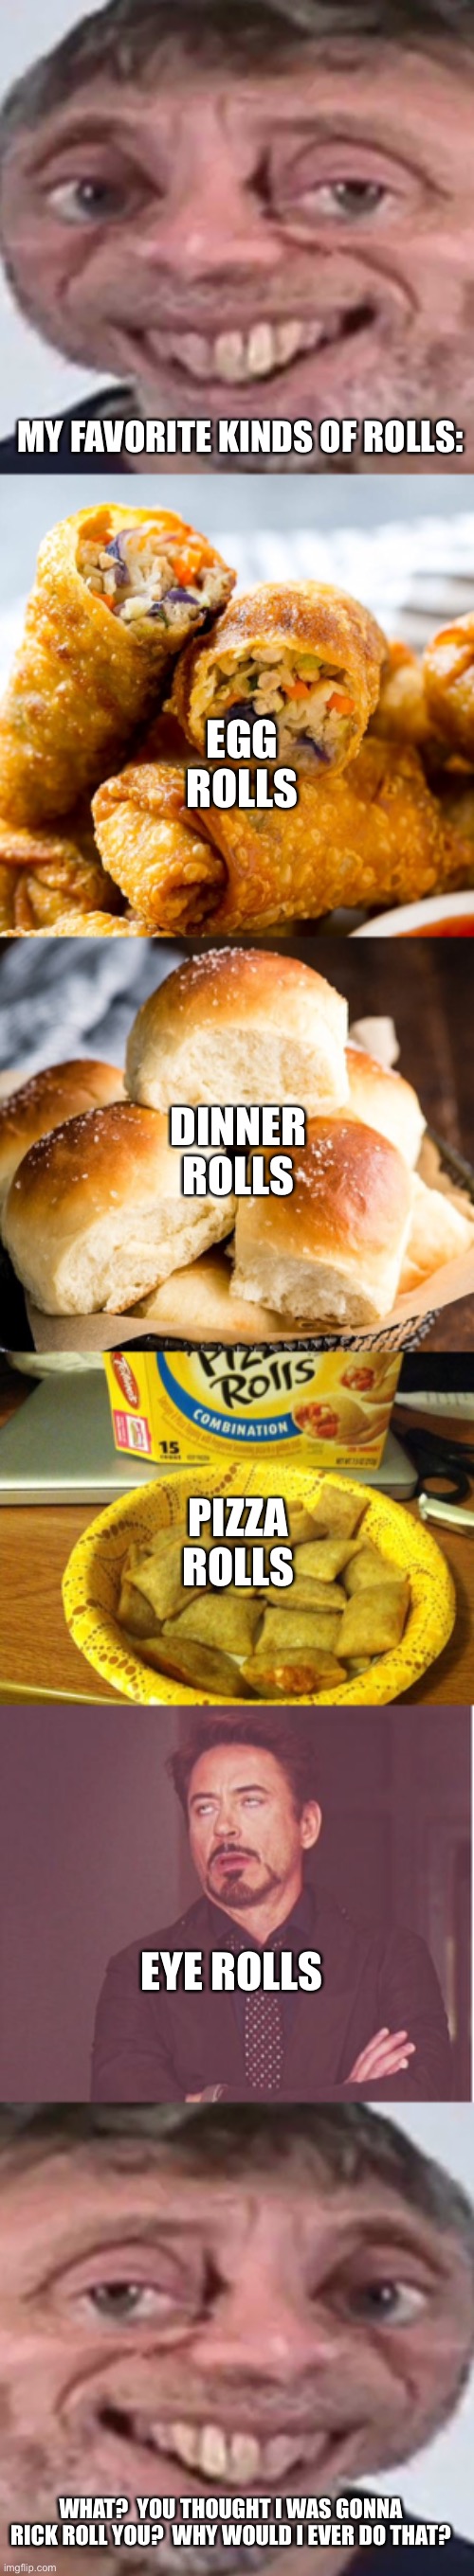 I would never! | MY FAVORITE KINDS OF ROLLS:; EGG ROLLS; DINNER ROLLS; PIZZA ROLLS; EYE ROLLS; WHAT?  YOU THOUGHT I WAS GONNA RICK ROLL YOU?  WHY WOULD I EVER DO THAT? | image tagged in noice,memes,good guy pizza rolls,face you make robert downey jr,rick | made w/ Imgflip meme maker